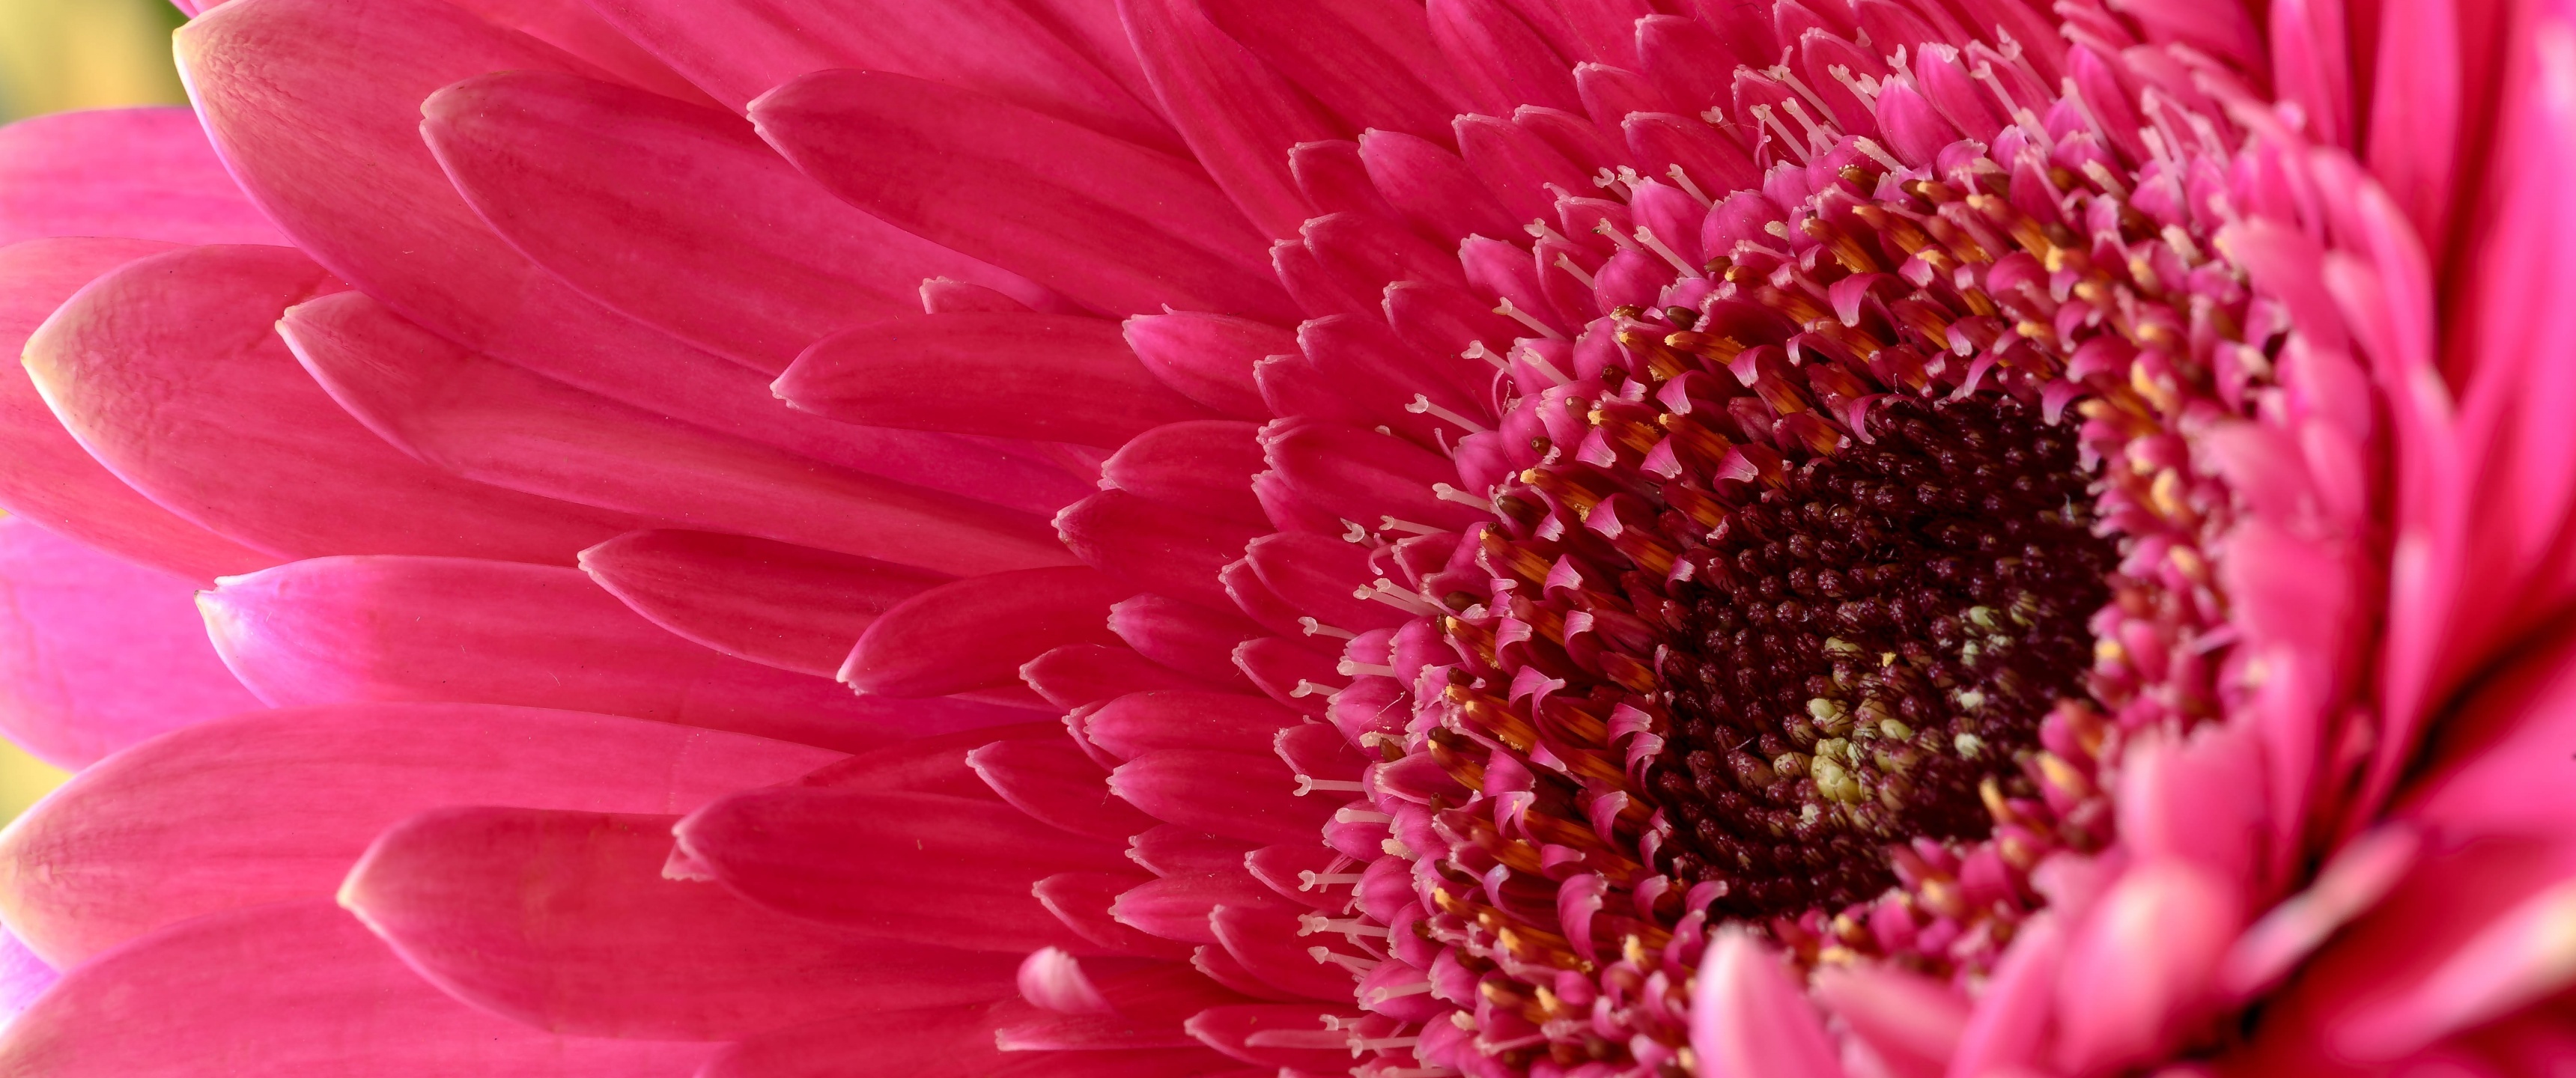 Gerbera Daisy: Tender perennials that can be grown outdoors as annuals in almost any climate. 3440x1440 Dual Screen Wallpaper.